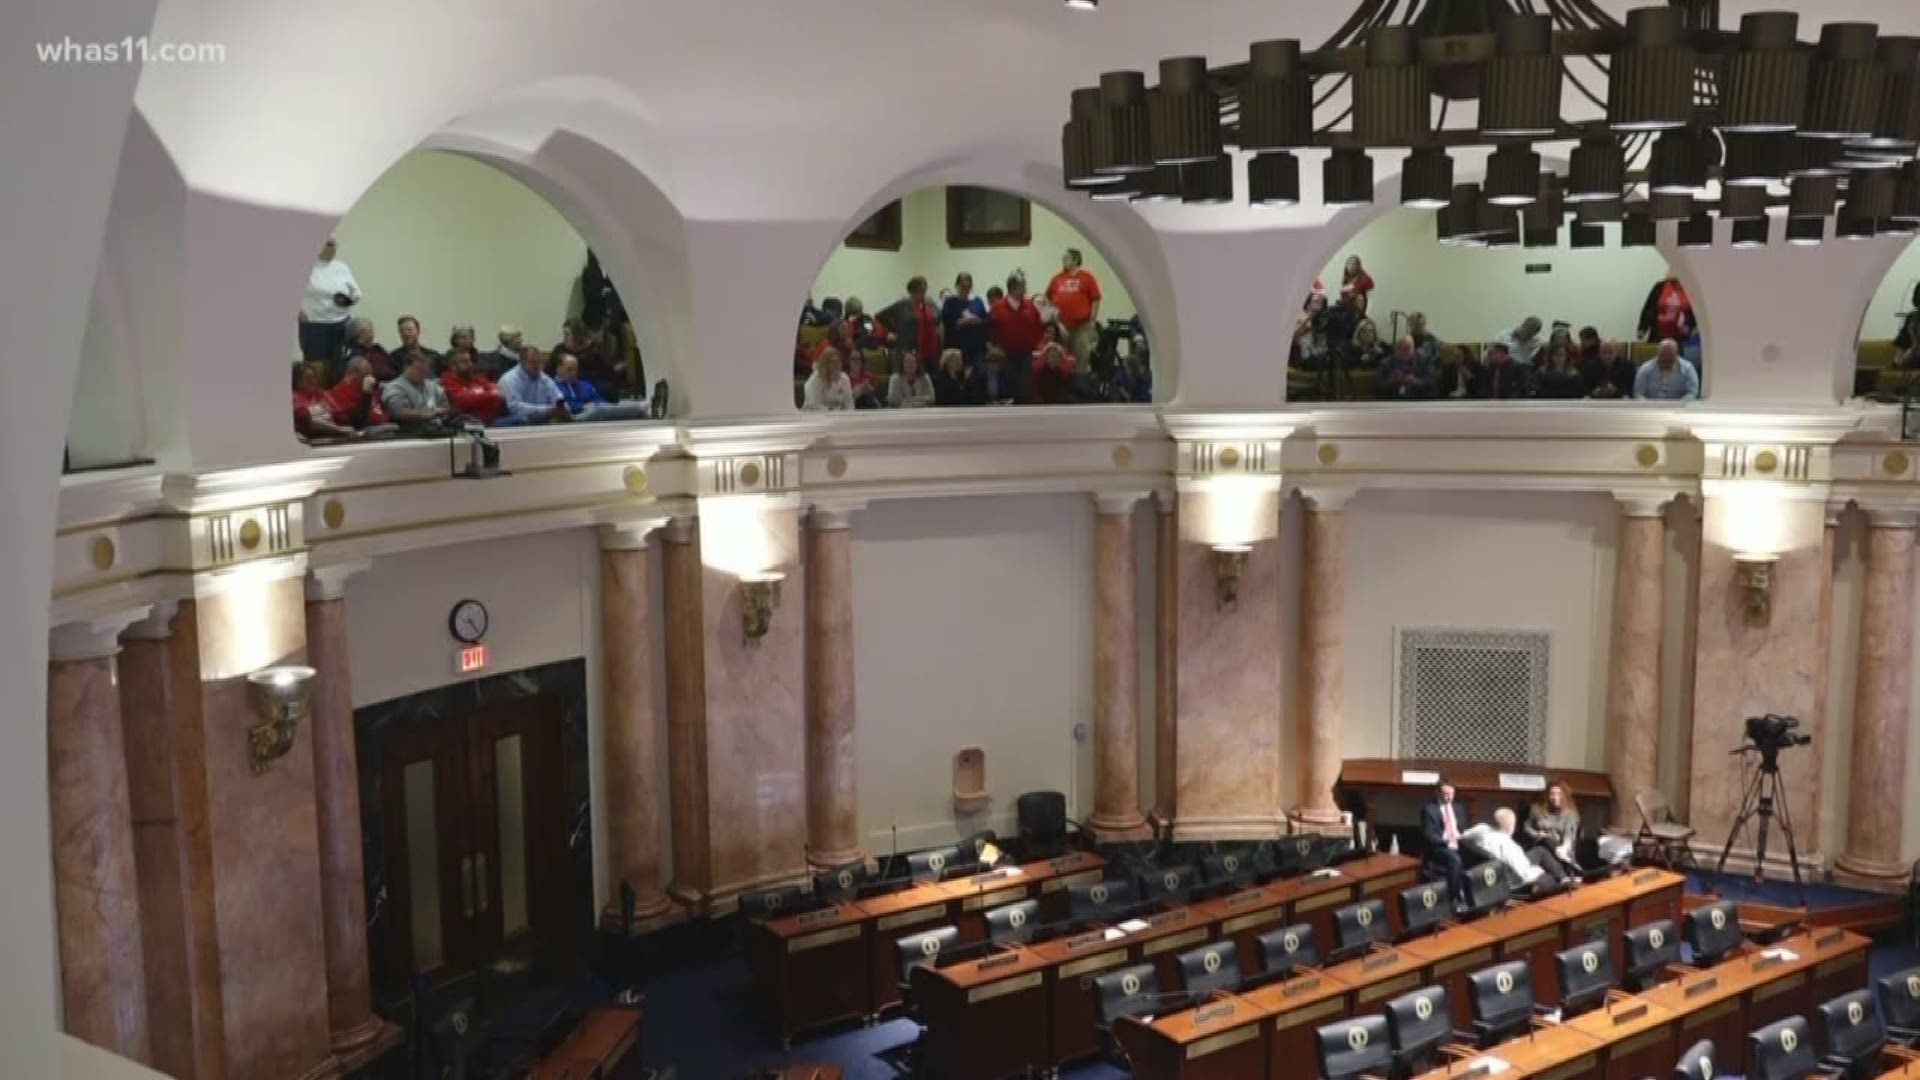 Kentucky teachers gathered in Frankfort to protest Governor Bevin's special session to address the pension crisis